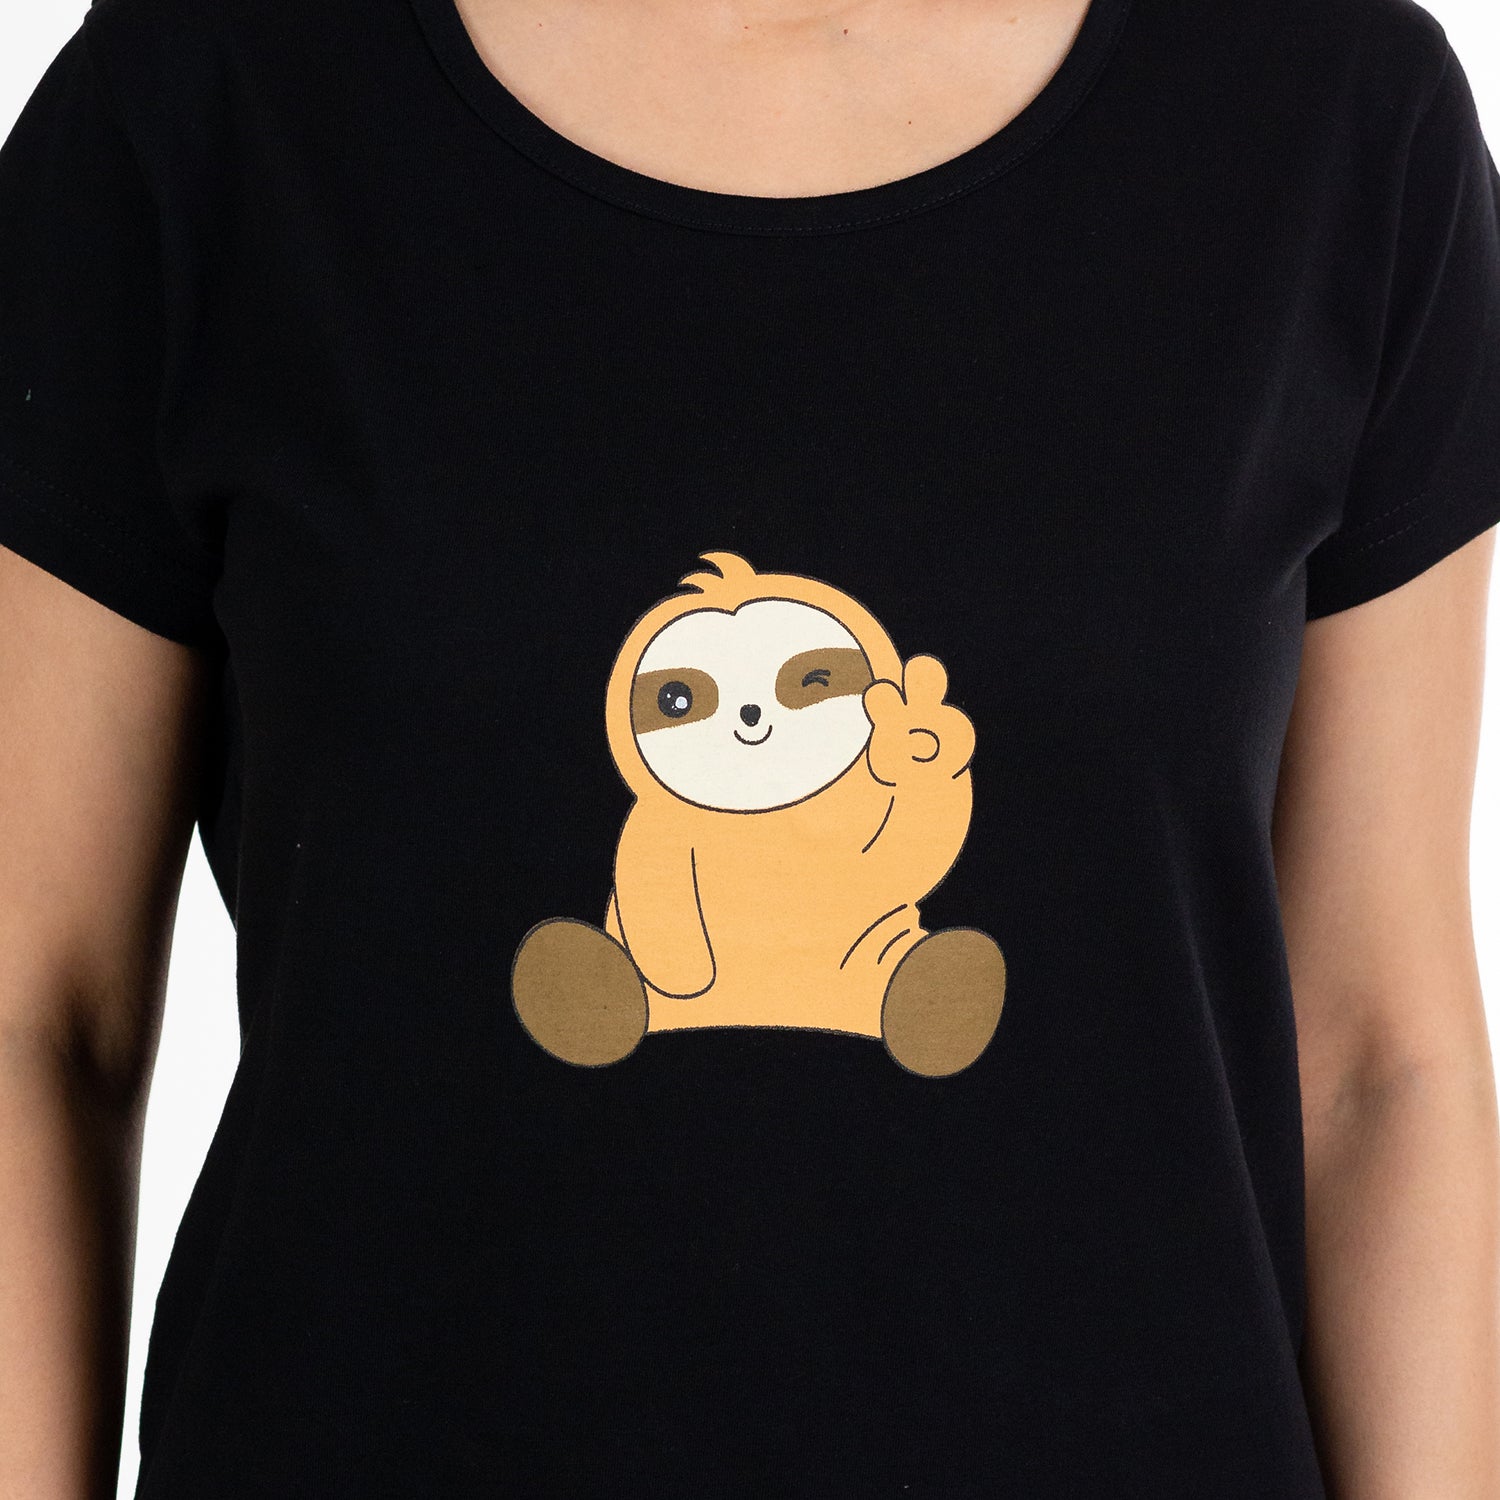 brown color sloth print on black color tshirt. Round neck and short sleeves